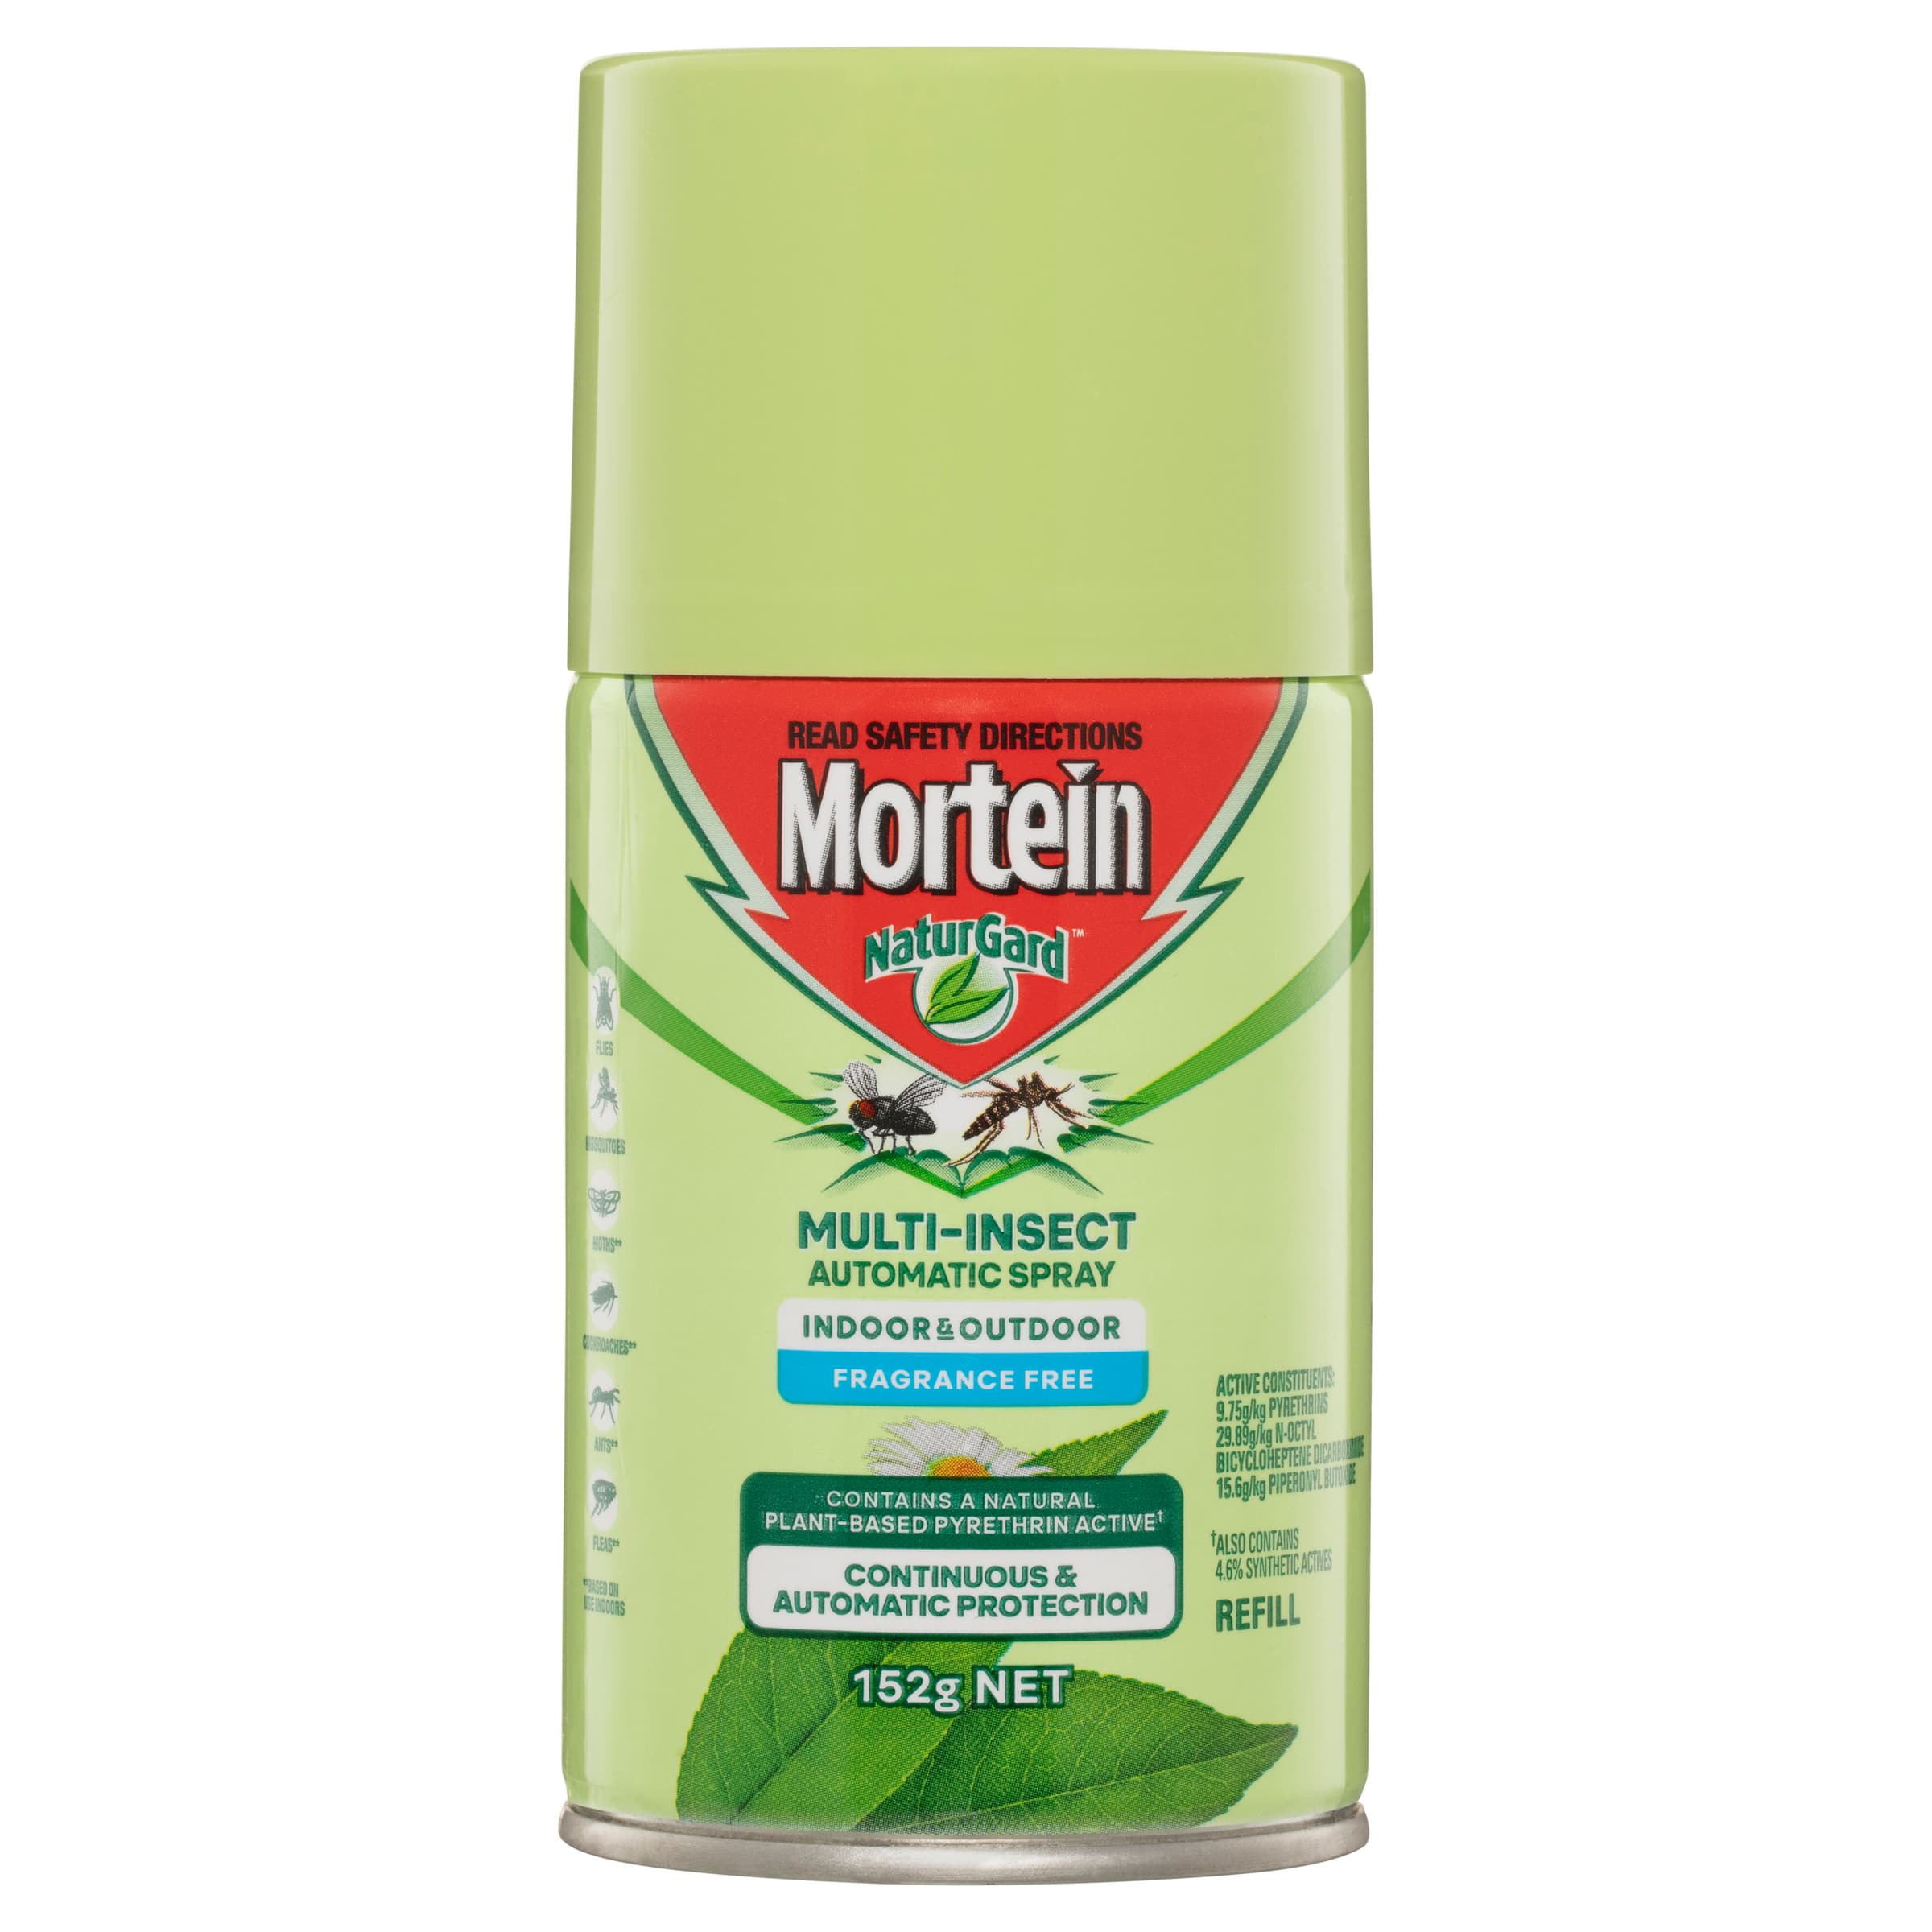 Mortein NaturGard Multi-Insect Automatic Refill Fragrance Free 152g